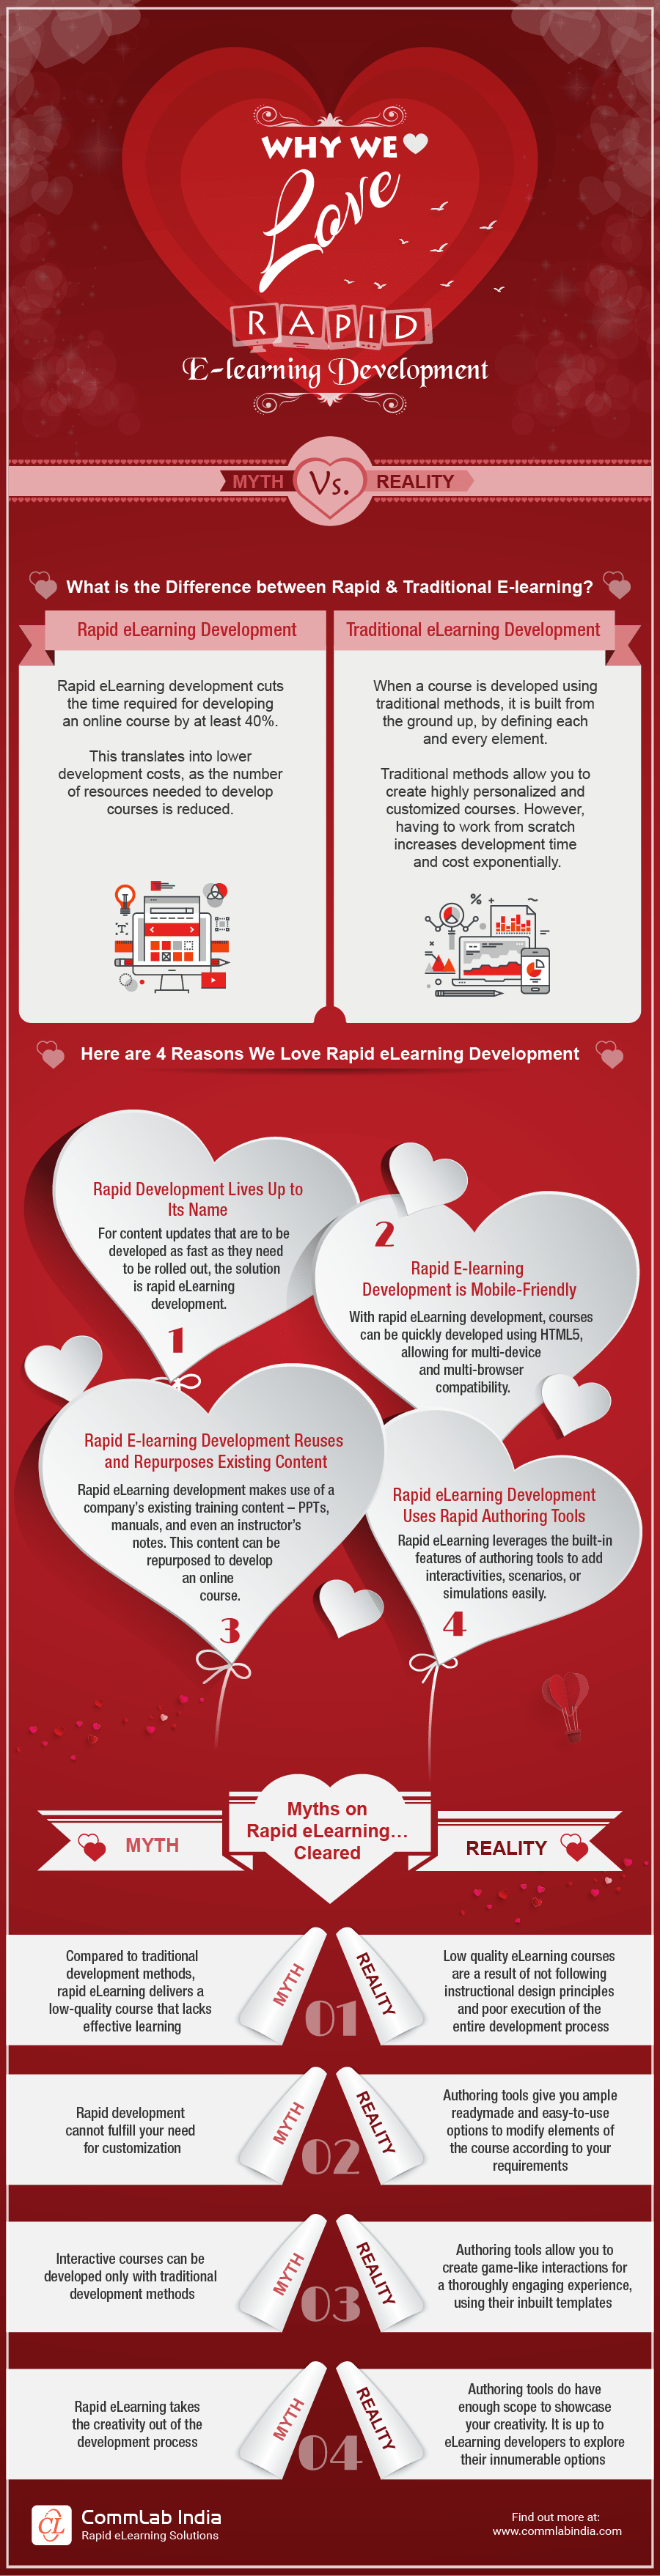 Why We Love Rapid E-learning Development: Myth Vs. Reality [Infographic]